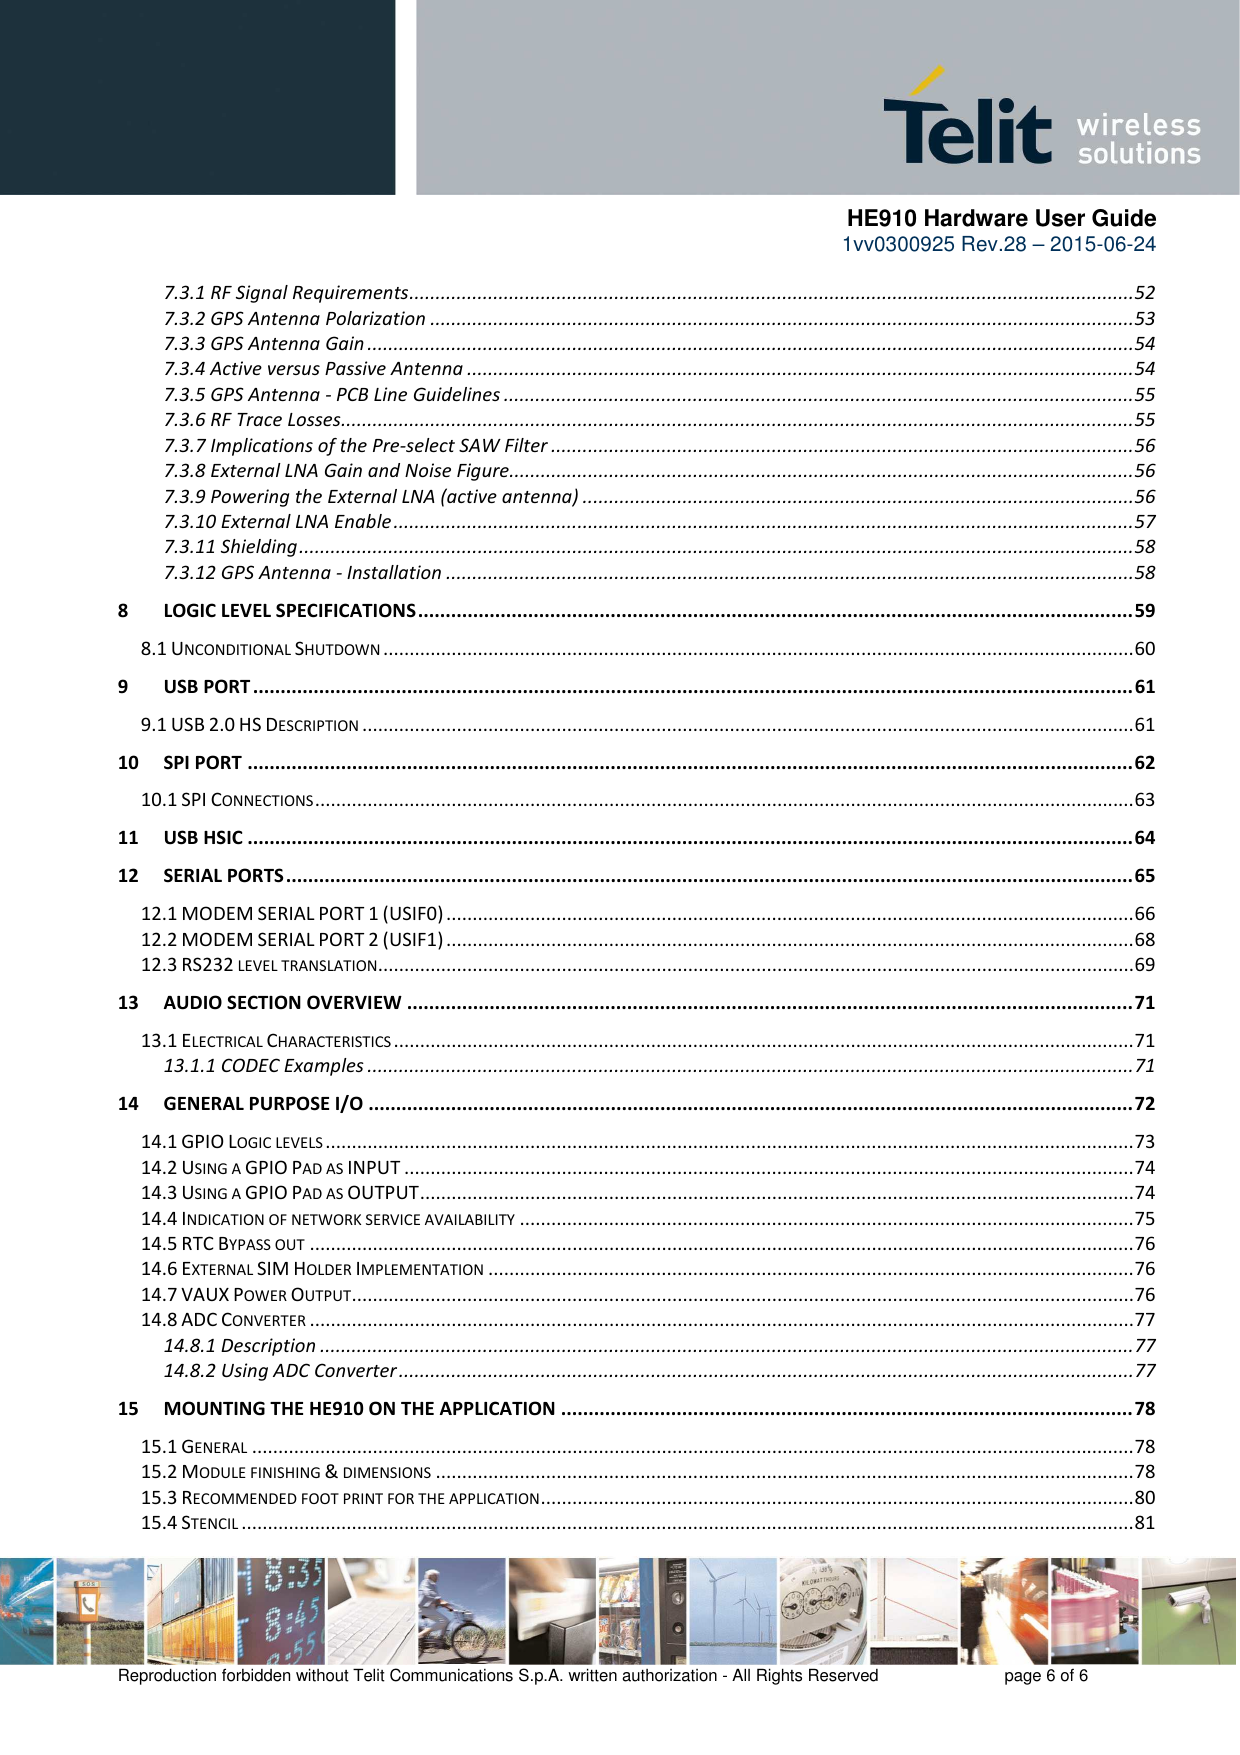      HE910 Hardware User Guide 1vv0300925 Rev.28 – 2015-06-24    Reproduction forbidden without Telit Communications S.p.A. written authorization - All Rights Reserved    page 6 of 6  7.3.1 RF Signal Requirements .......................................................................................................................................... 52 7.3.2 GPS Antenna Polarization ...................................................................................................................................... 53 7.3.3 GPS Antenna Gain .................................................................................................................................................. 54 7.3.4 Active versus Passive Antenna ............................................................................................................................... 54 7.3.5 GPS Antenna - PCB Line Guidelines ........................................................................................................................ 55 7.3.6 RF Trace Losses....................................................................................................................................................... 55 7.3.7 Implications of the Pre-select SAW Filter ............................................................................................................... 56 7.3.8 External LNA Gain and Noise Figure....................................................................................................................... 56 7.3.9 Powering the External LNA (active antenna) ......................................................................................................... 56 7.3.10 External LNA Enable ............................................................................................................................................. 57 7.3.11 Shielding ............................................................................................................................................................... 58 7.3.12 GPS Antenna - Installation ................................................................................................................................... 58 8 LOGIC LEVEL SPECIFICATIONS .................................................................................................................................. 59 8.1 UNCONDITIONAL SHUTDOWN ............................................................................................................................................... 60 9 USB PORT ................................................................................................................................................................ 61 9.1 USB 2.0 HS DESCRIPTION ................................................................................................................................................... 61 10 SPI PORT ................................................................................................................................................................. 62 10.1 SPI CONNECTIONS ............................................................................................................................................................ 63 11 USB HSIC ................................................................................................................................................................. 64 12 SERIAL PORTS .......................................................................................................................................................... 65 12.1 MODEM SERIAL PORT 1 (USIF0) ................................................................................................................................... 66 12.2 MODEM SERIAL PORT 2 (USIF1) ................................................................................................................................... 68 12.3 RS232 LEVEL TRANSLATION ................................................................................................................................................ 69 13 AUDIO SECTION OVERVIEW .................................................................................................................................... 71 13.1 ELECTRICAL CHARACTERISTICS ............................................................................................................................................. 71 13.1.1 CODEC Examples .................................................................................................................................................. 71 14 GENERAL PURPOSE I/O ........................................................................................................................................... 72 14.1 GPIO LOGIC LEVELS .......................................................................................................................................................... 73 14.2 USING A GPIO PAD AS INPUT ........................................................................................................................................... 74 14.3 USING A GPIO PAD AS OUTPUT ........................................................................................................................................ 74 14.4 INDICATION OF NETWORK SERVICE AVAILABILITY ..................................................................................................................... 75 14.5 RTC BYPASS OUT ............................................................................................................................................................. 76 14.6 EXTERNAL SIM HOLDER IMPLEMENTATION ........................................................................................................................... 76 14.7 VAUX POWER OUTPUT ..................................................................................................................................................... 76 14.8 ADC CONVERTER ............................................................................................................................................................. 77 14.8.1 Description ........................................................................................................................................................... 77 14.8.2 Using ADC Converter ............................................................................................................................................ 77 15 MOUNTING THE HE910 ON THE APPLICATION ........................................................................................................ 78 15.1 GENERAL ........................................................................................................................................................................ 78 15.2 MODULE FINISHING &amp; DIMENSIONS ..................................................................................................................................... 78 15.3 RECOMMENDED FOOT PRINT FOR THE APPLICATION ................................................................................................................. 80 15.4 STENCIL .......................................................................................................................................................................... 81 